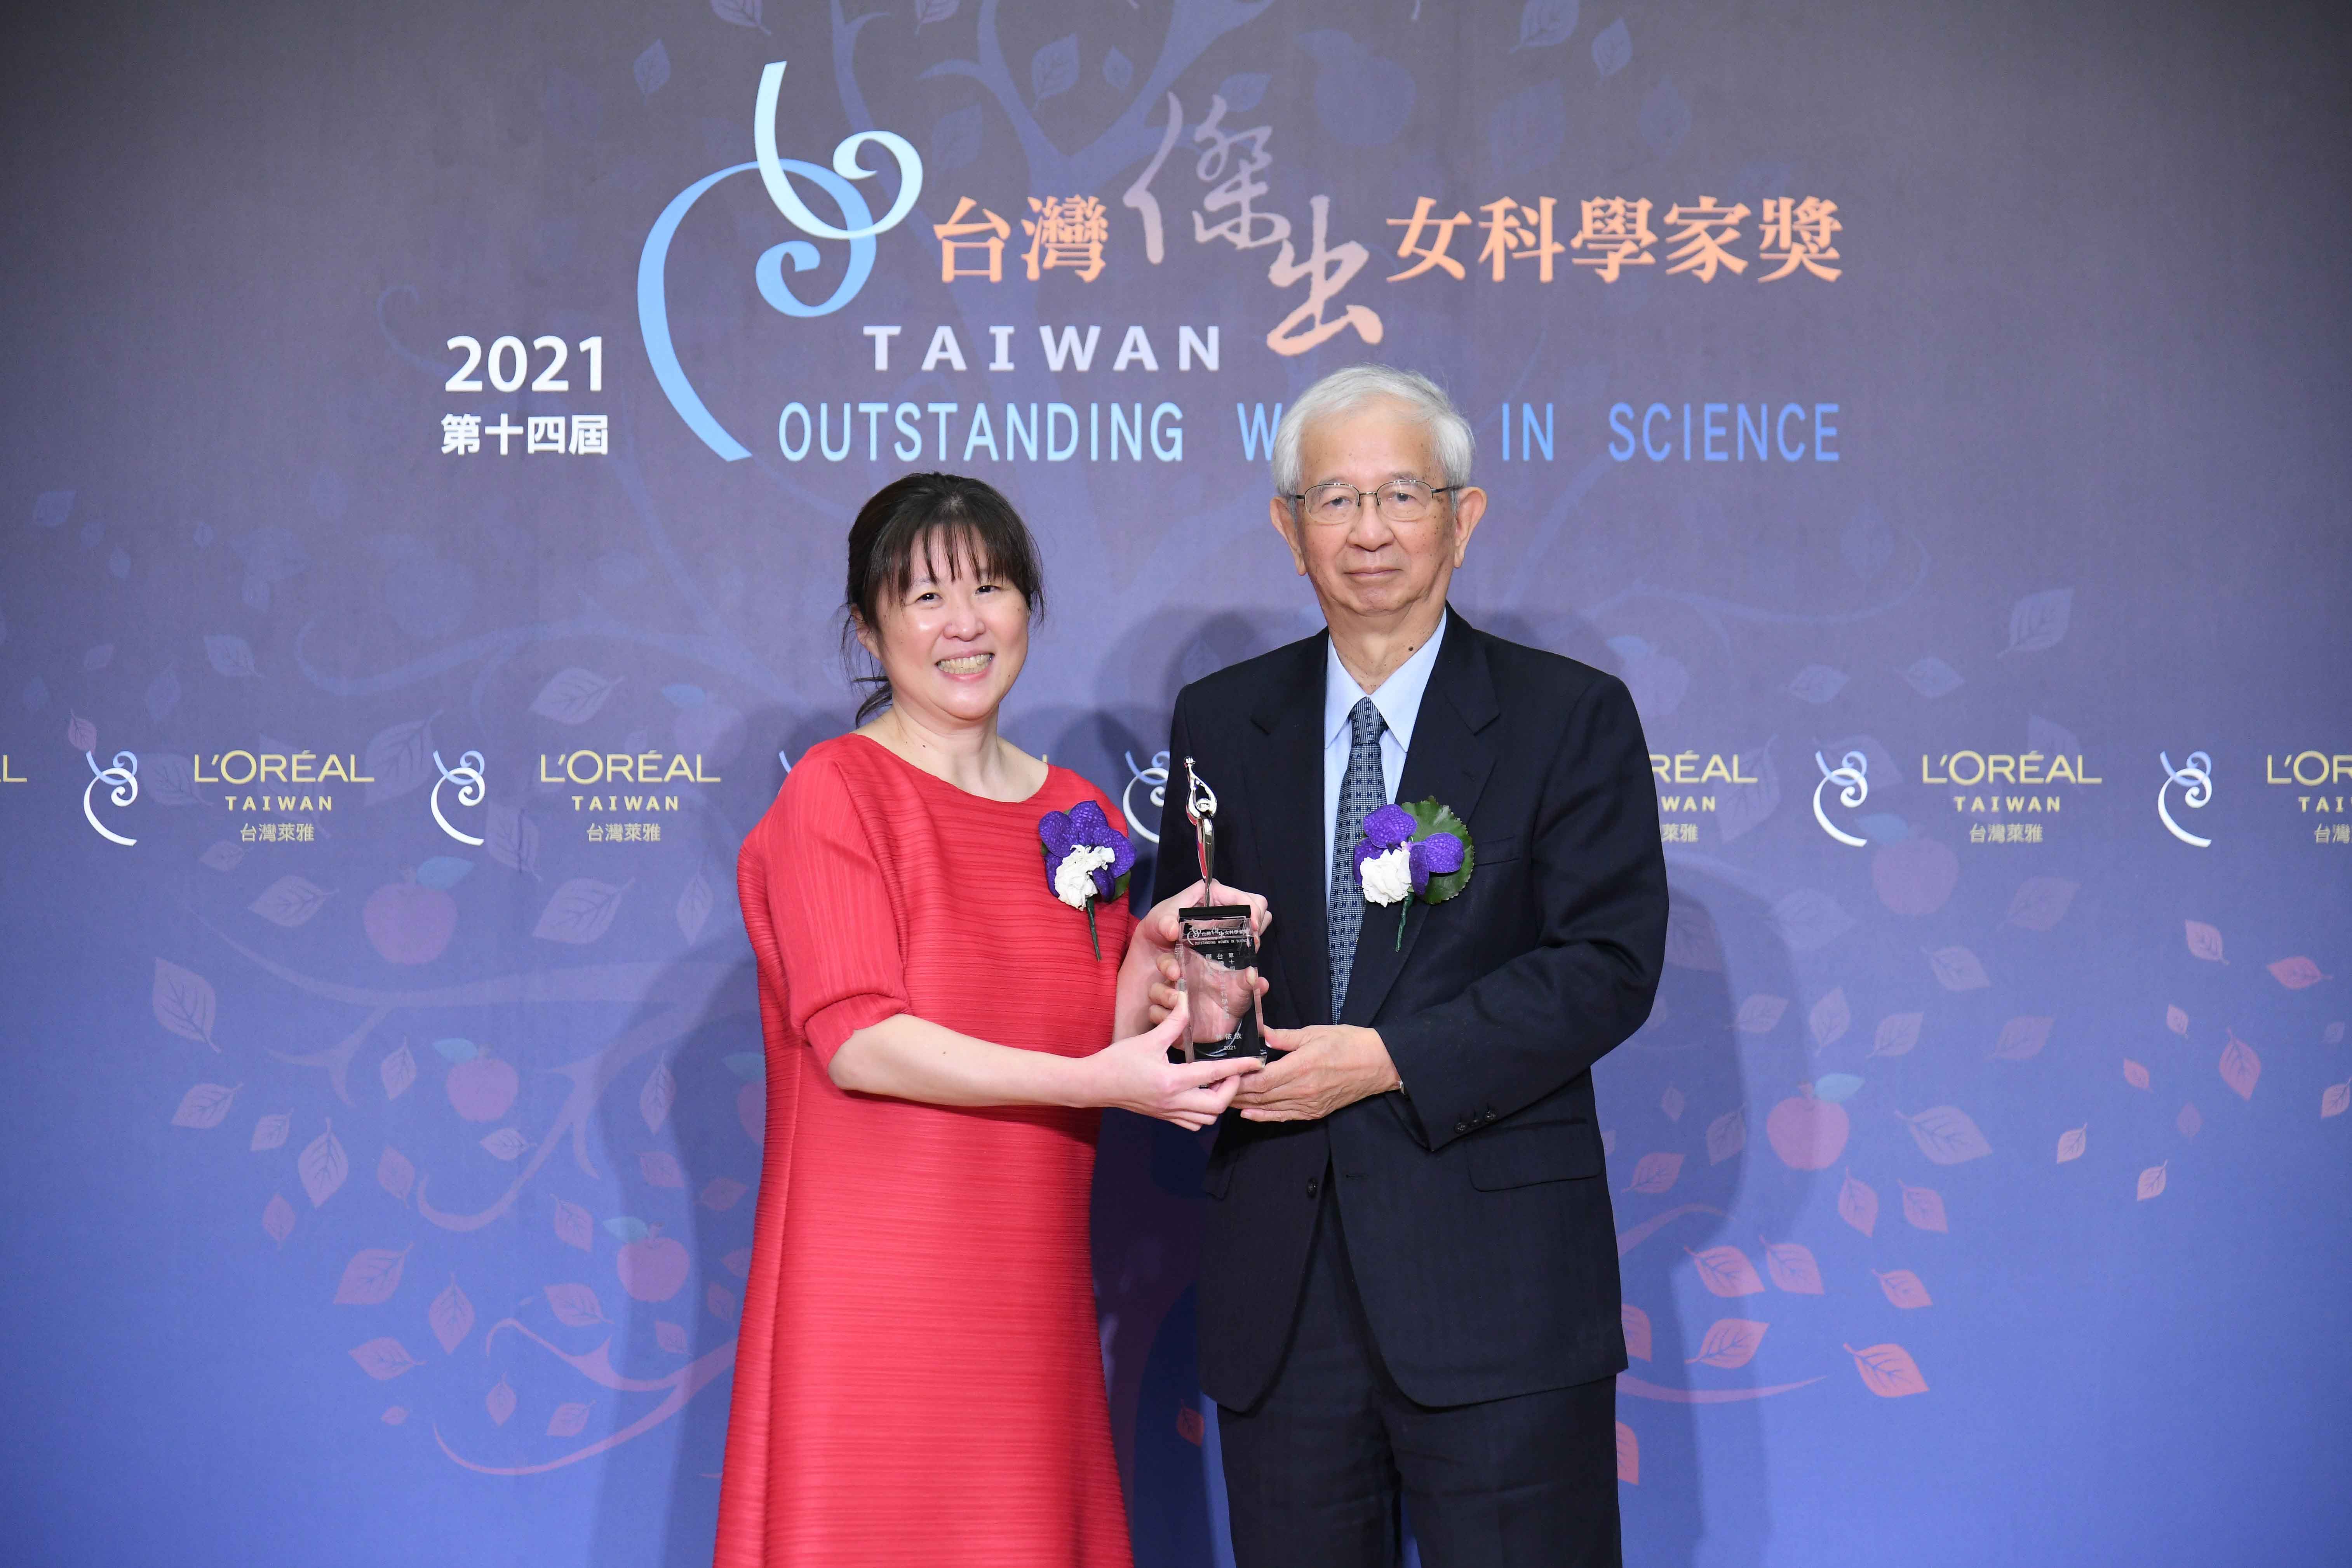 Prof. I-I Lin , Distinguished Professor of Atmospheric Sciences at National Taiwan University, wins the “2021 Taiwan Outstanding Women In Science”.